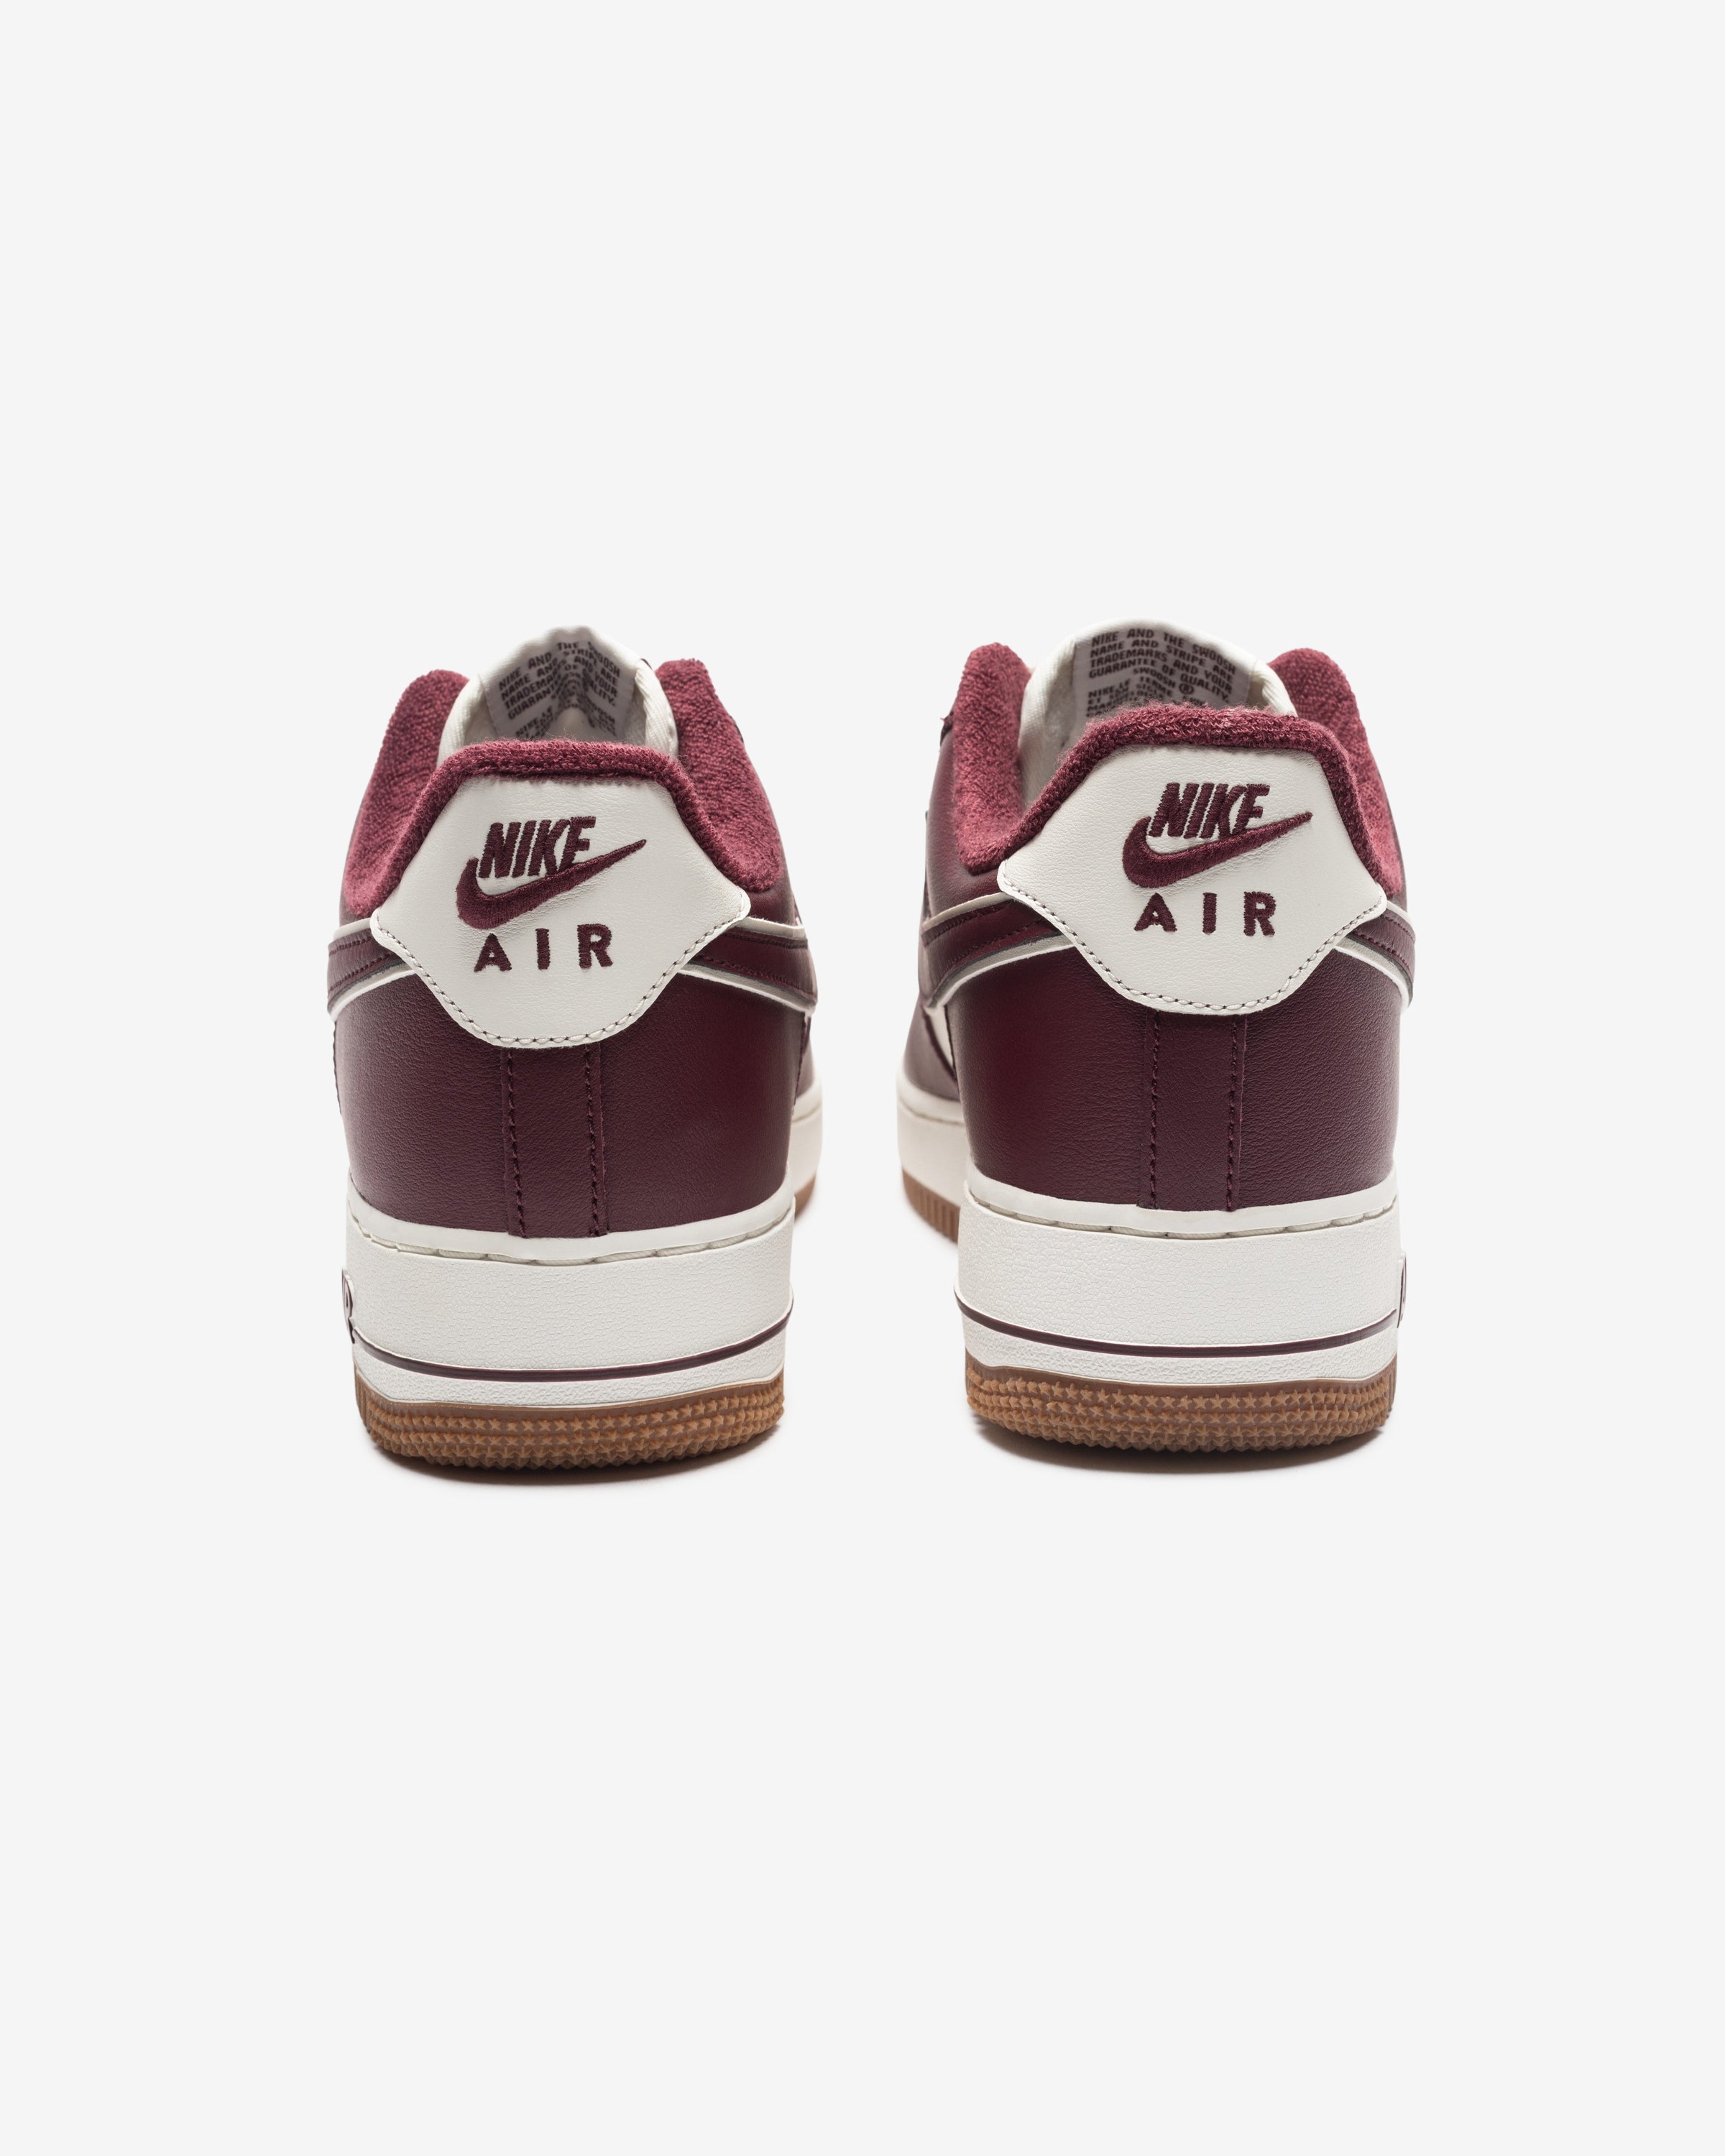 NIKE AIR FORCE 1 '07 LV8 - SAIL/ NIGHTMAROON/ GUMBROWN – Undefeated